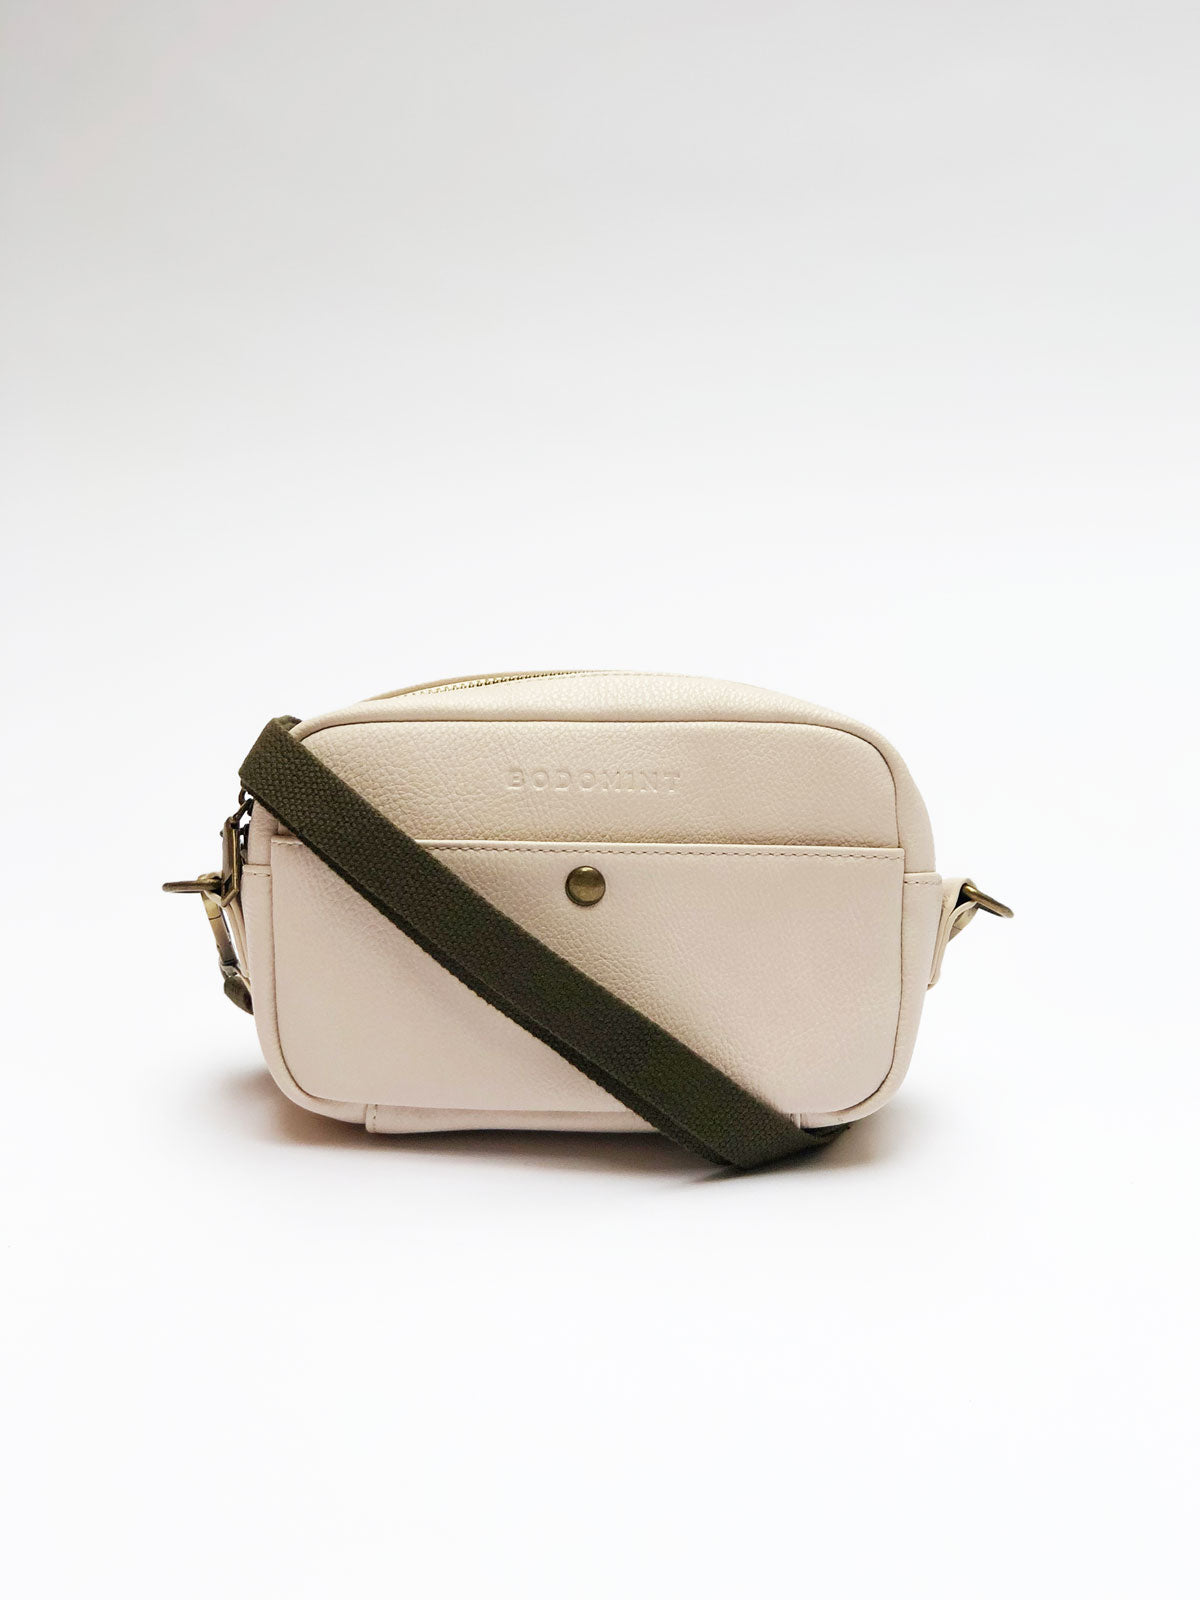 Solid Skinny Strap in Military Green